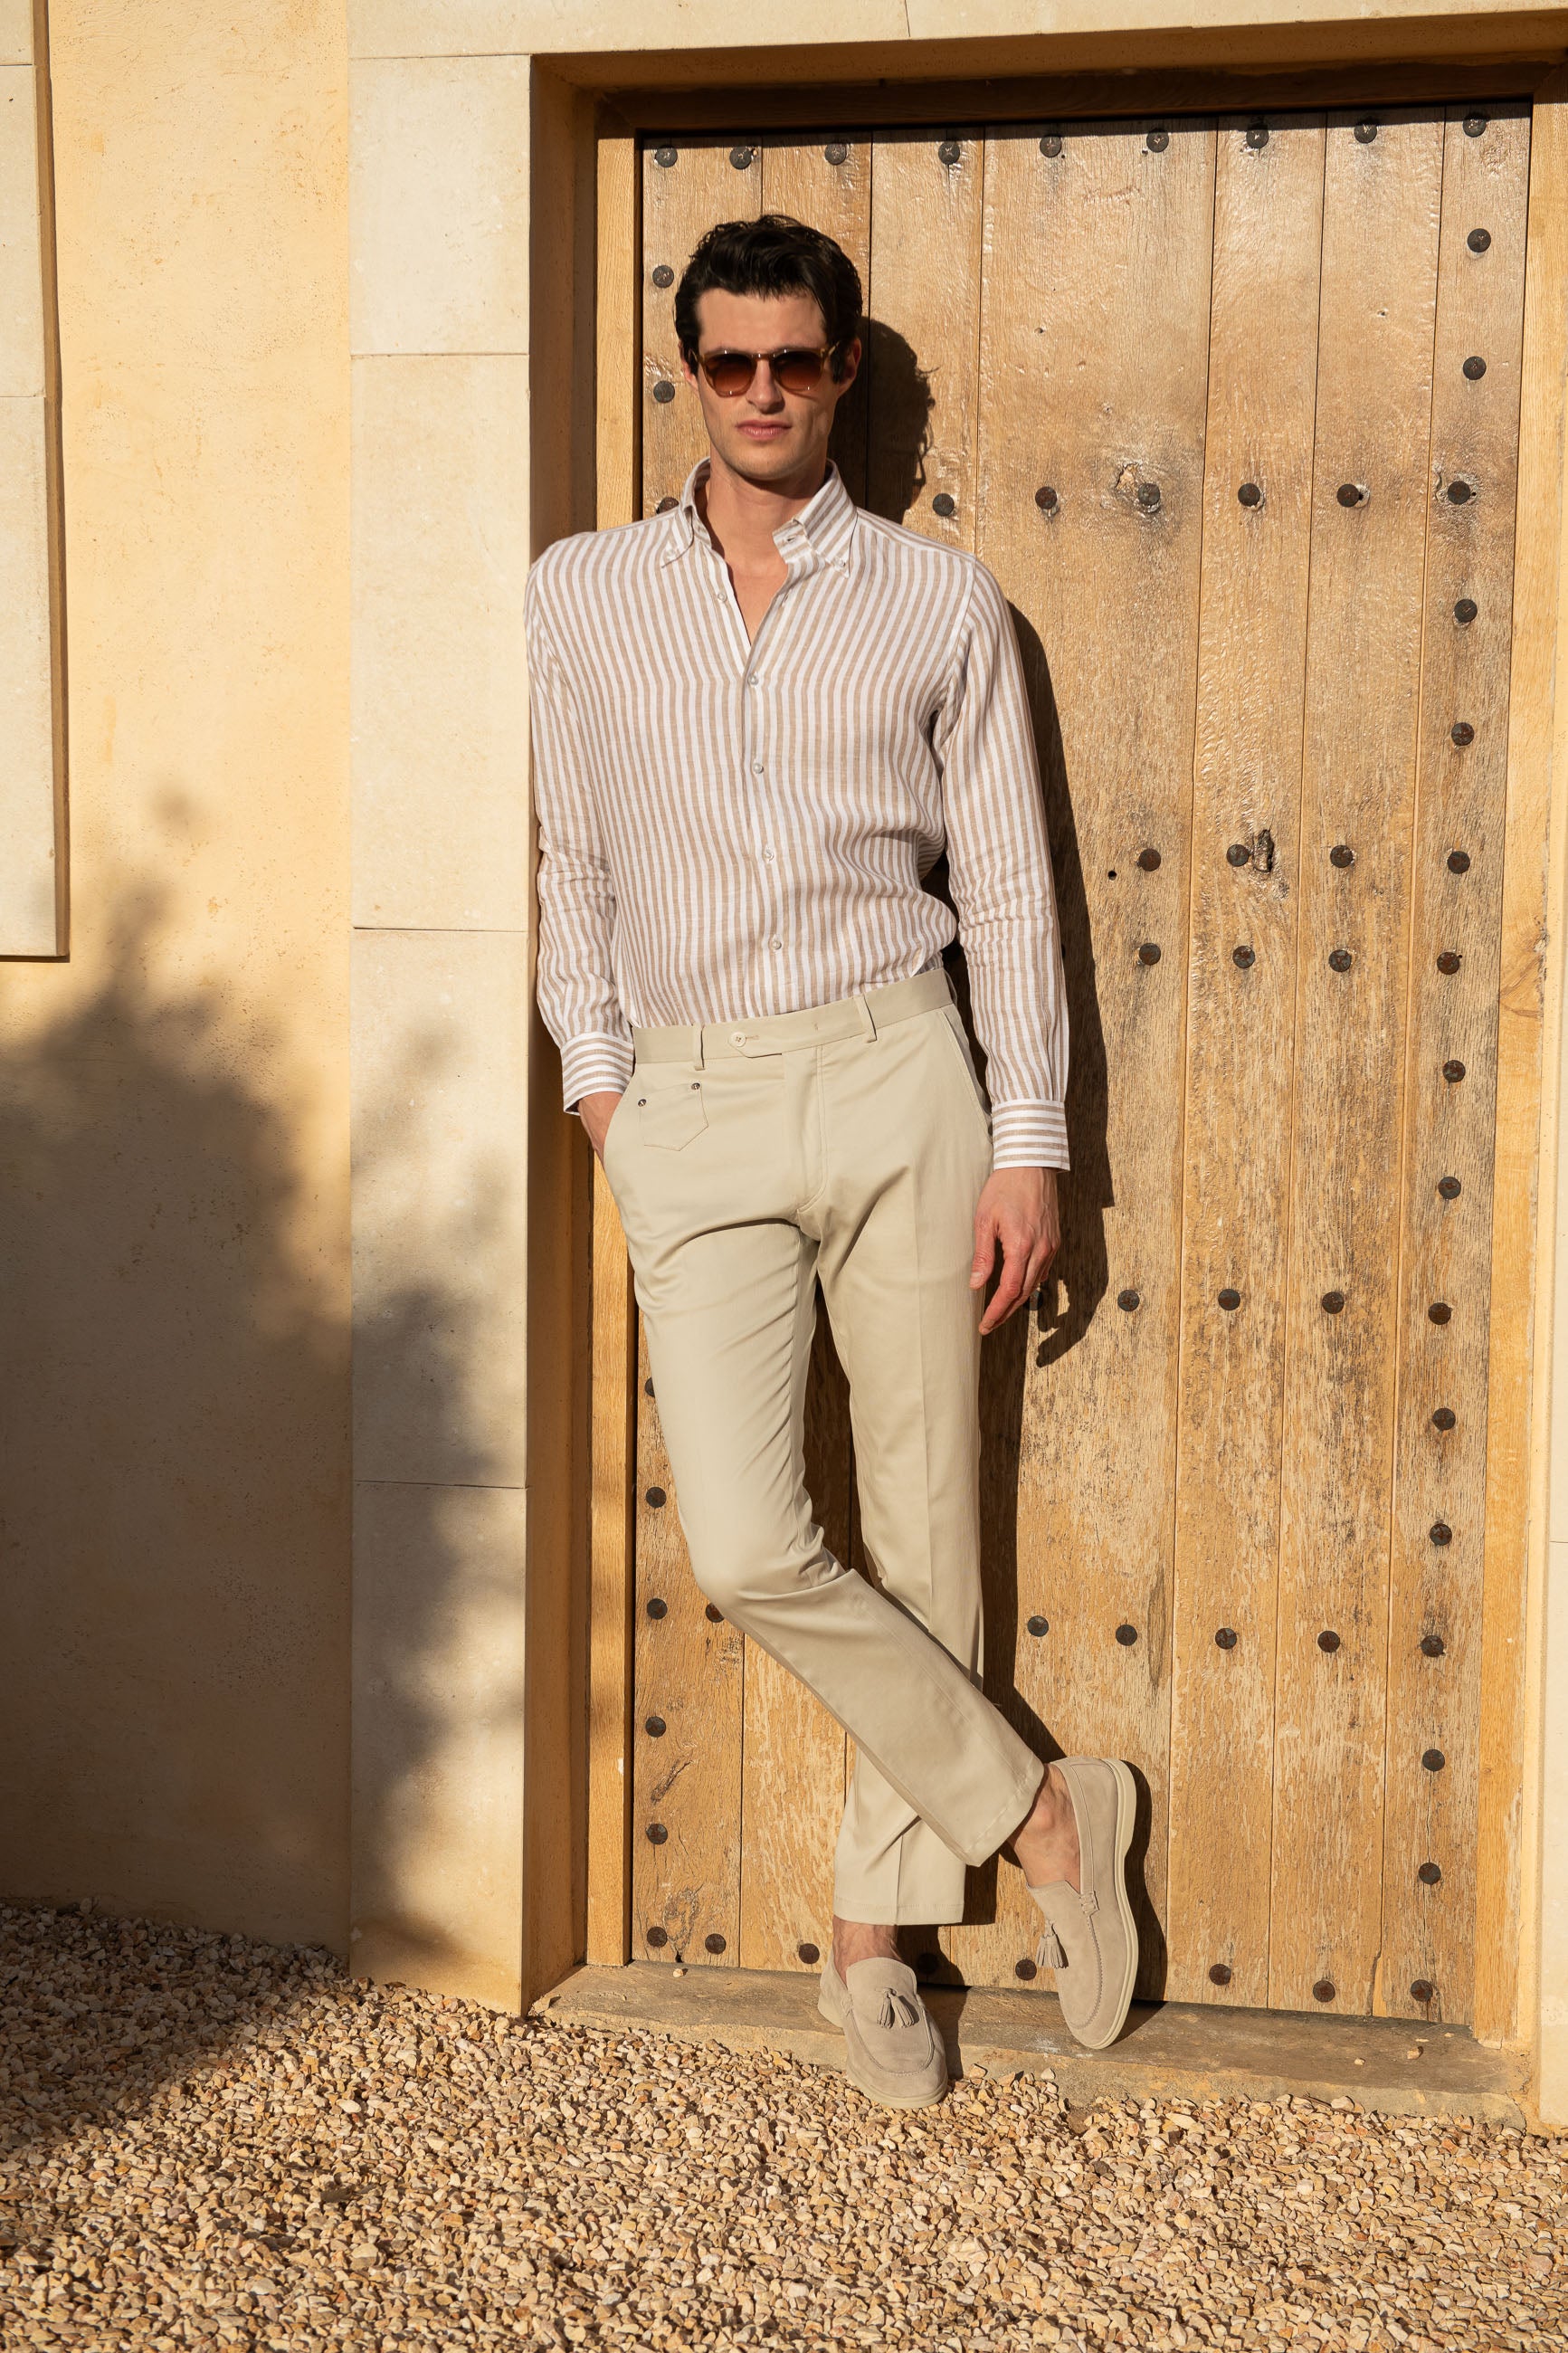 Beige Cotton trousers, Sirmione Trousers, Cotton Trousers with Coin pocket, Beige  summer cotton trousers, Pantaloni in cotone Beige, Pantaloni Sirmione, Pantaloni in cotone con tasca portamonete, Pantaloni estivi in cotone Beige, Pantalon en coton Beige, Pantalon Sirmione, Pantalon en coton avec poche à monnaie, Pantalon d'été en coton Beige,